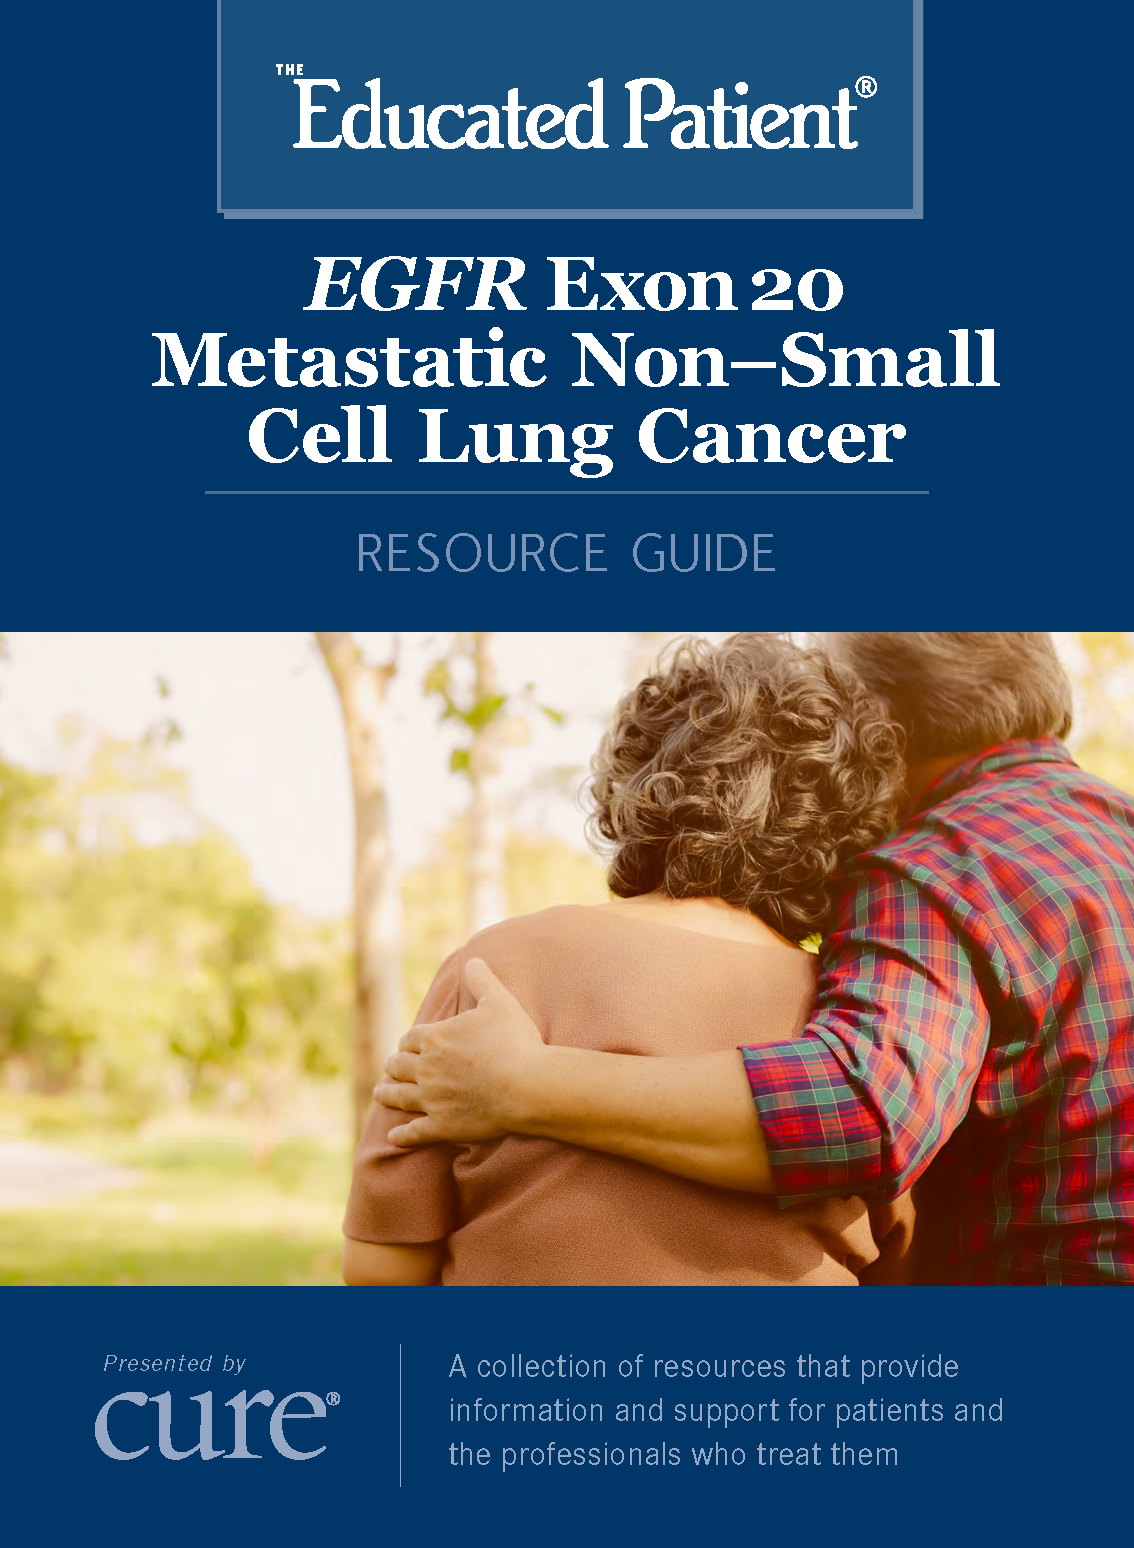 Metastatic Non-Small Cell Lung Cancer